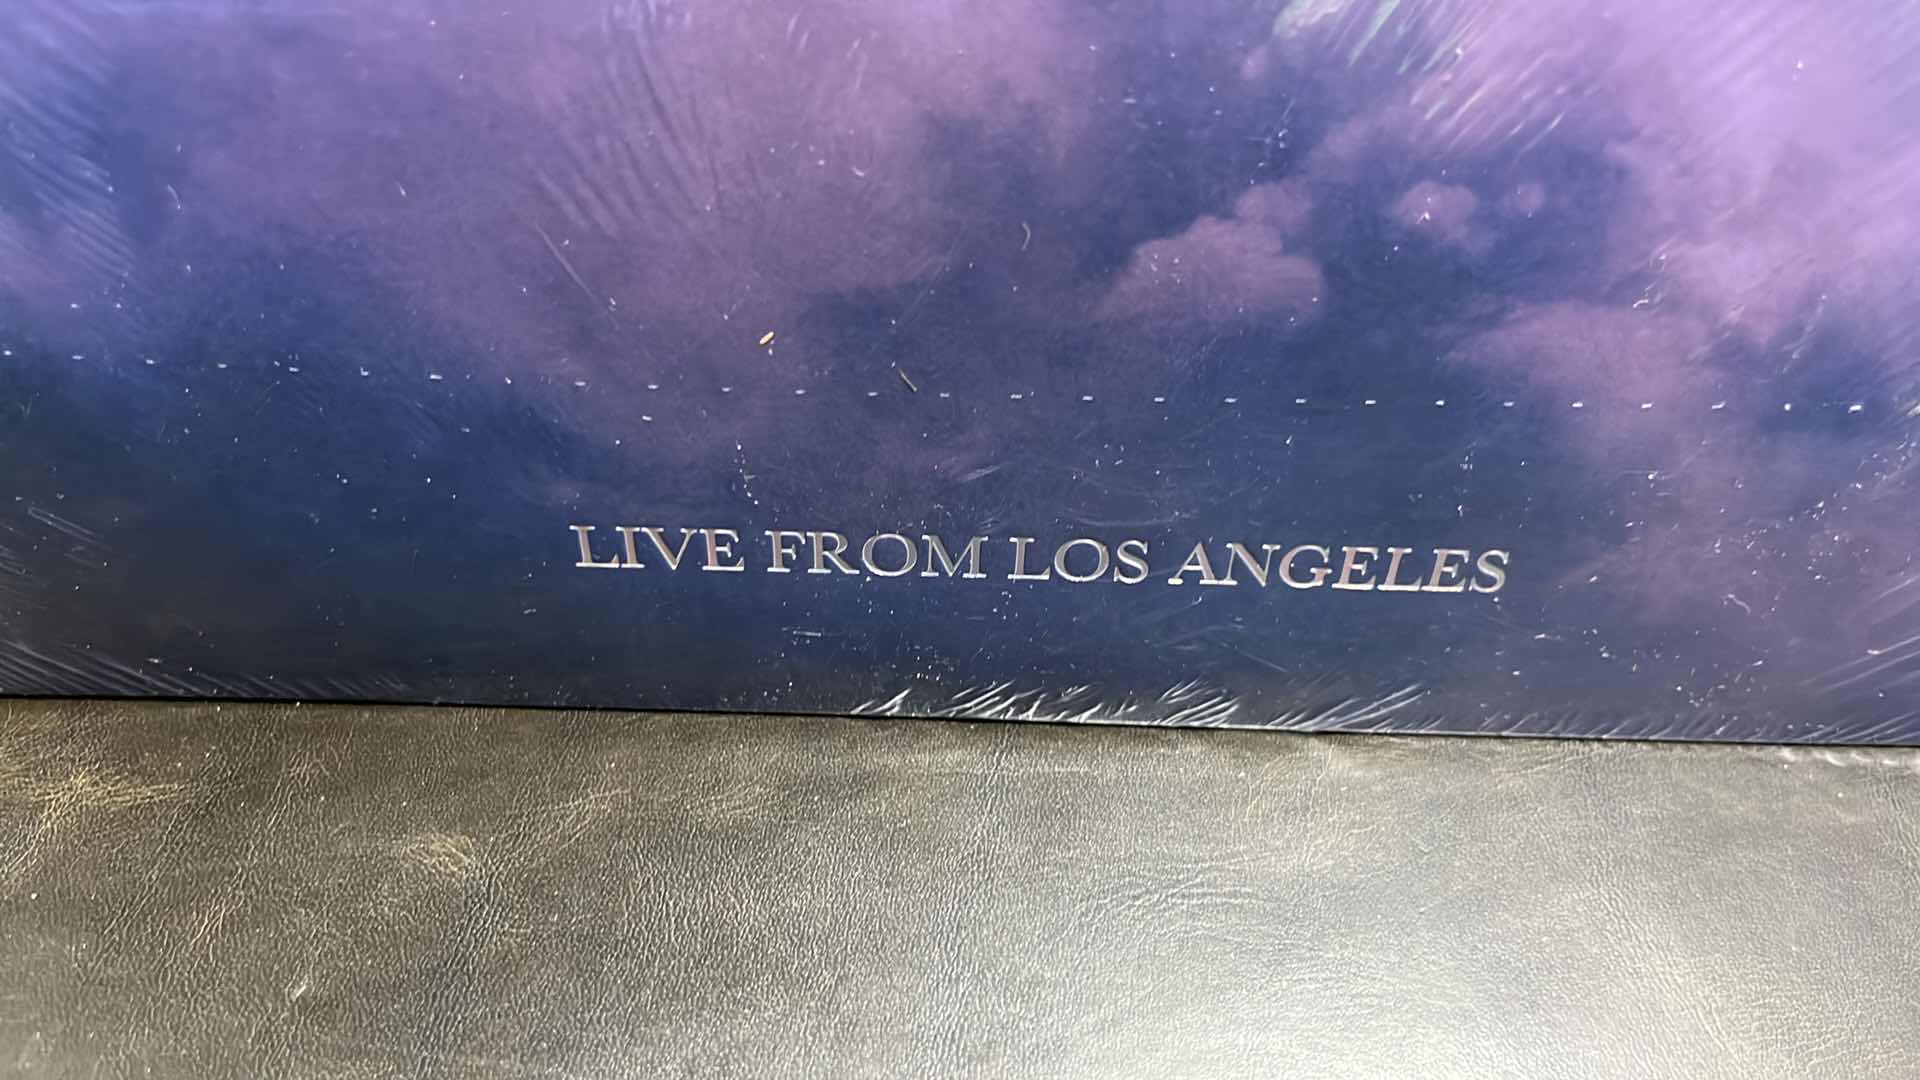 Photo 3 of NEW GRETA VAN FLEET STRANGE HORIZONS 2021 LIVE FROM LOS ANGELES EXCLUSIVE LIMITED EDITION CLEAR COLORED VINYL